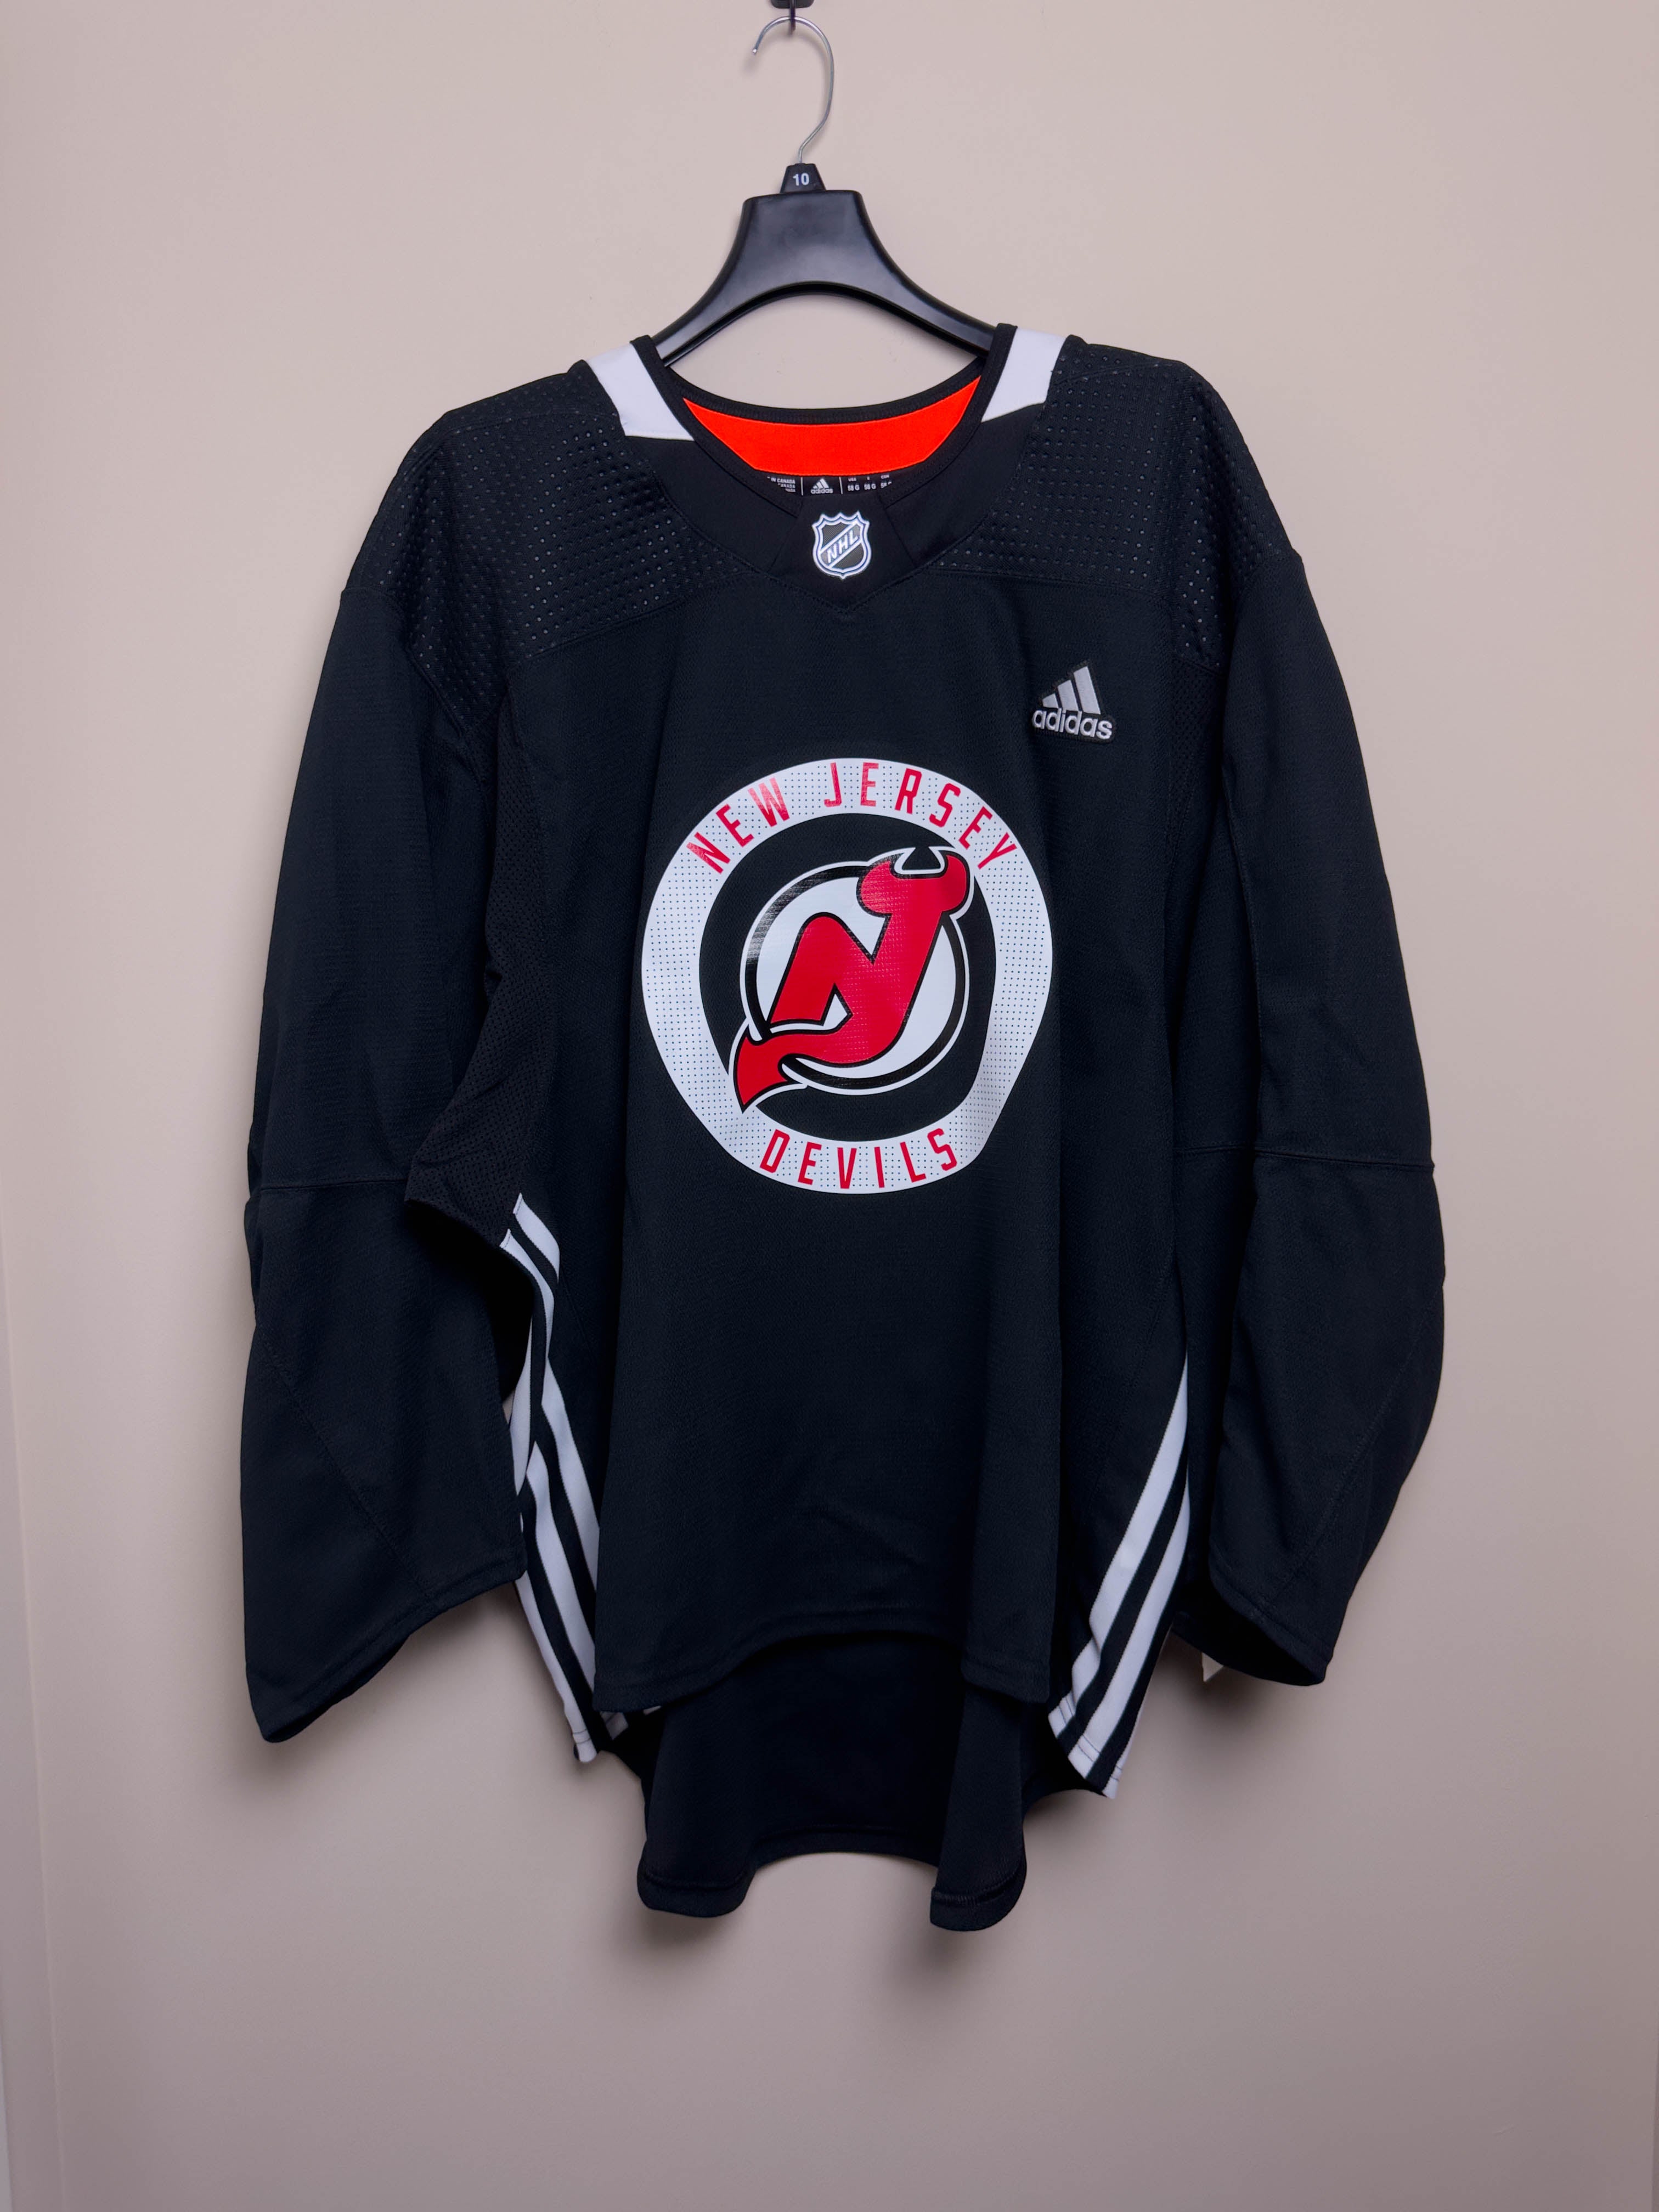 New Jersey Devils NHL Adidas MiC Team Issued Practice Jersey Size 58G (Goalie Cut)